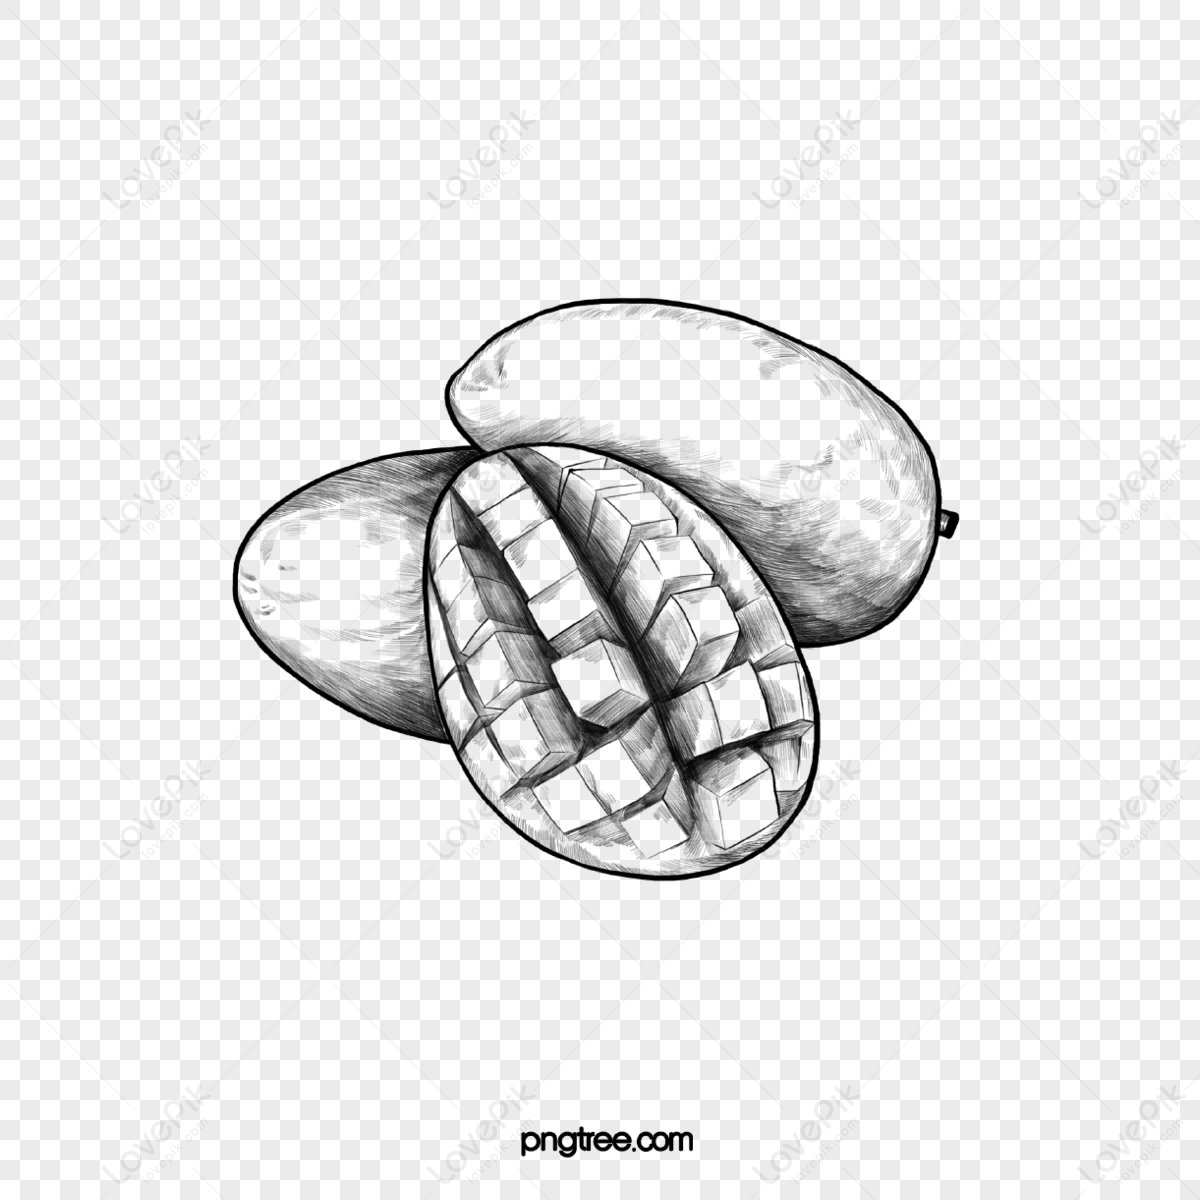 How to Draw a Mango Step by Step - EasyDrawingTips